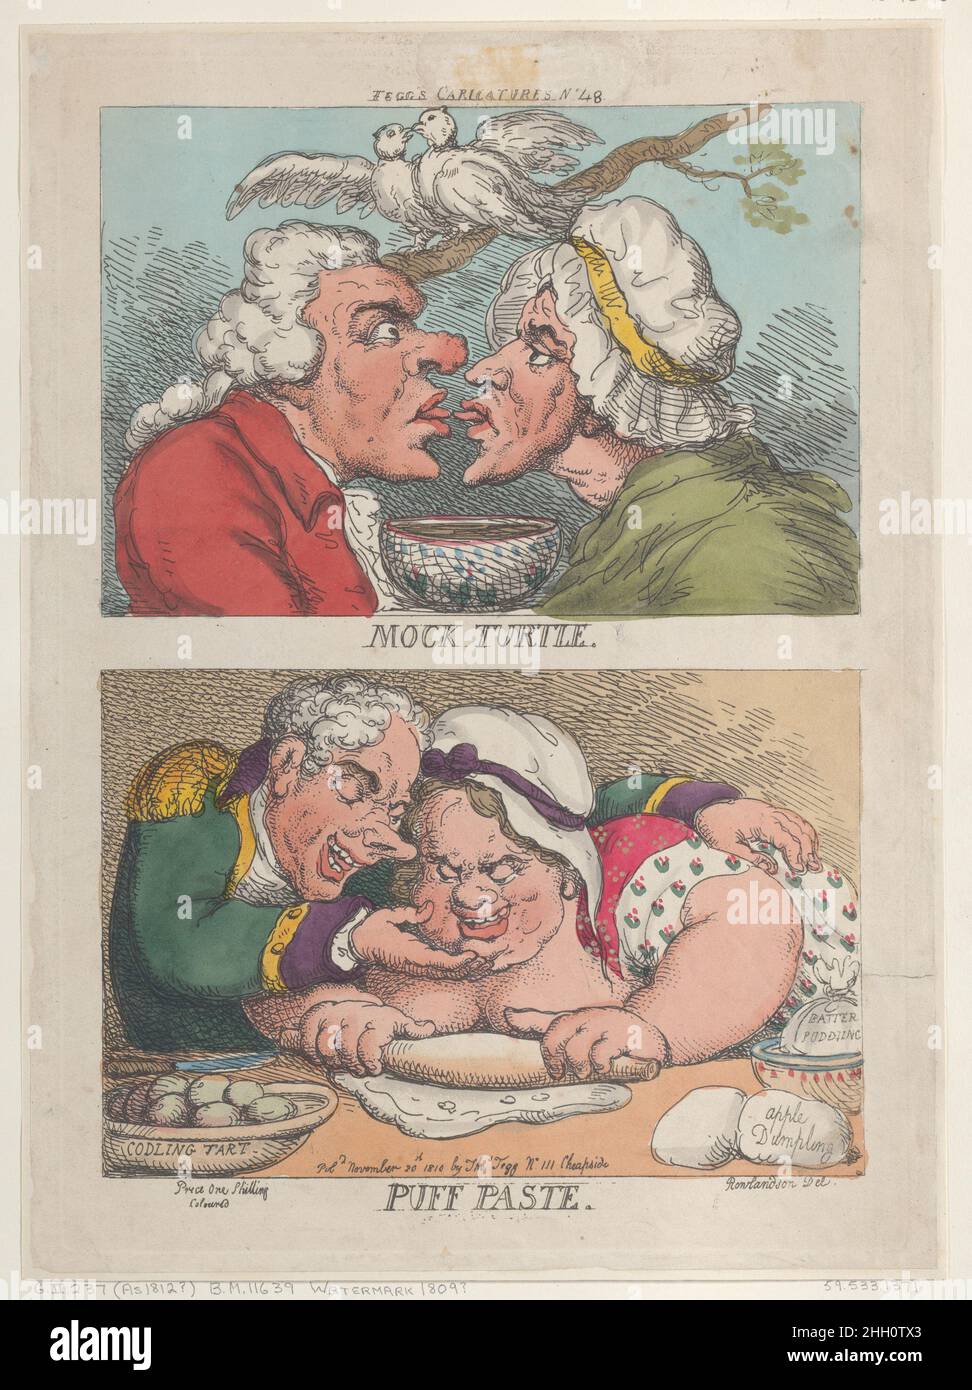 Mock Turtle; Puff Paste November 20, 1810 Thomas Rowlandson Two designs on one plate: at top, a couple touches tongues over a bowl, with two doves on a branch above. Below, a woman rolls dough while a man puts his arm around her and touches her chin.. Mock Turtle; Puff Paste. Thomas Rowlandson (British, London 1757–1827 London). November 20, 1810. Hand-colored etching. Thomas Tegg (British, 1776–1846). Prints Stock Photo